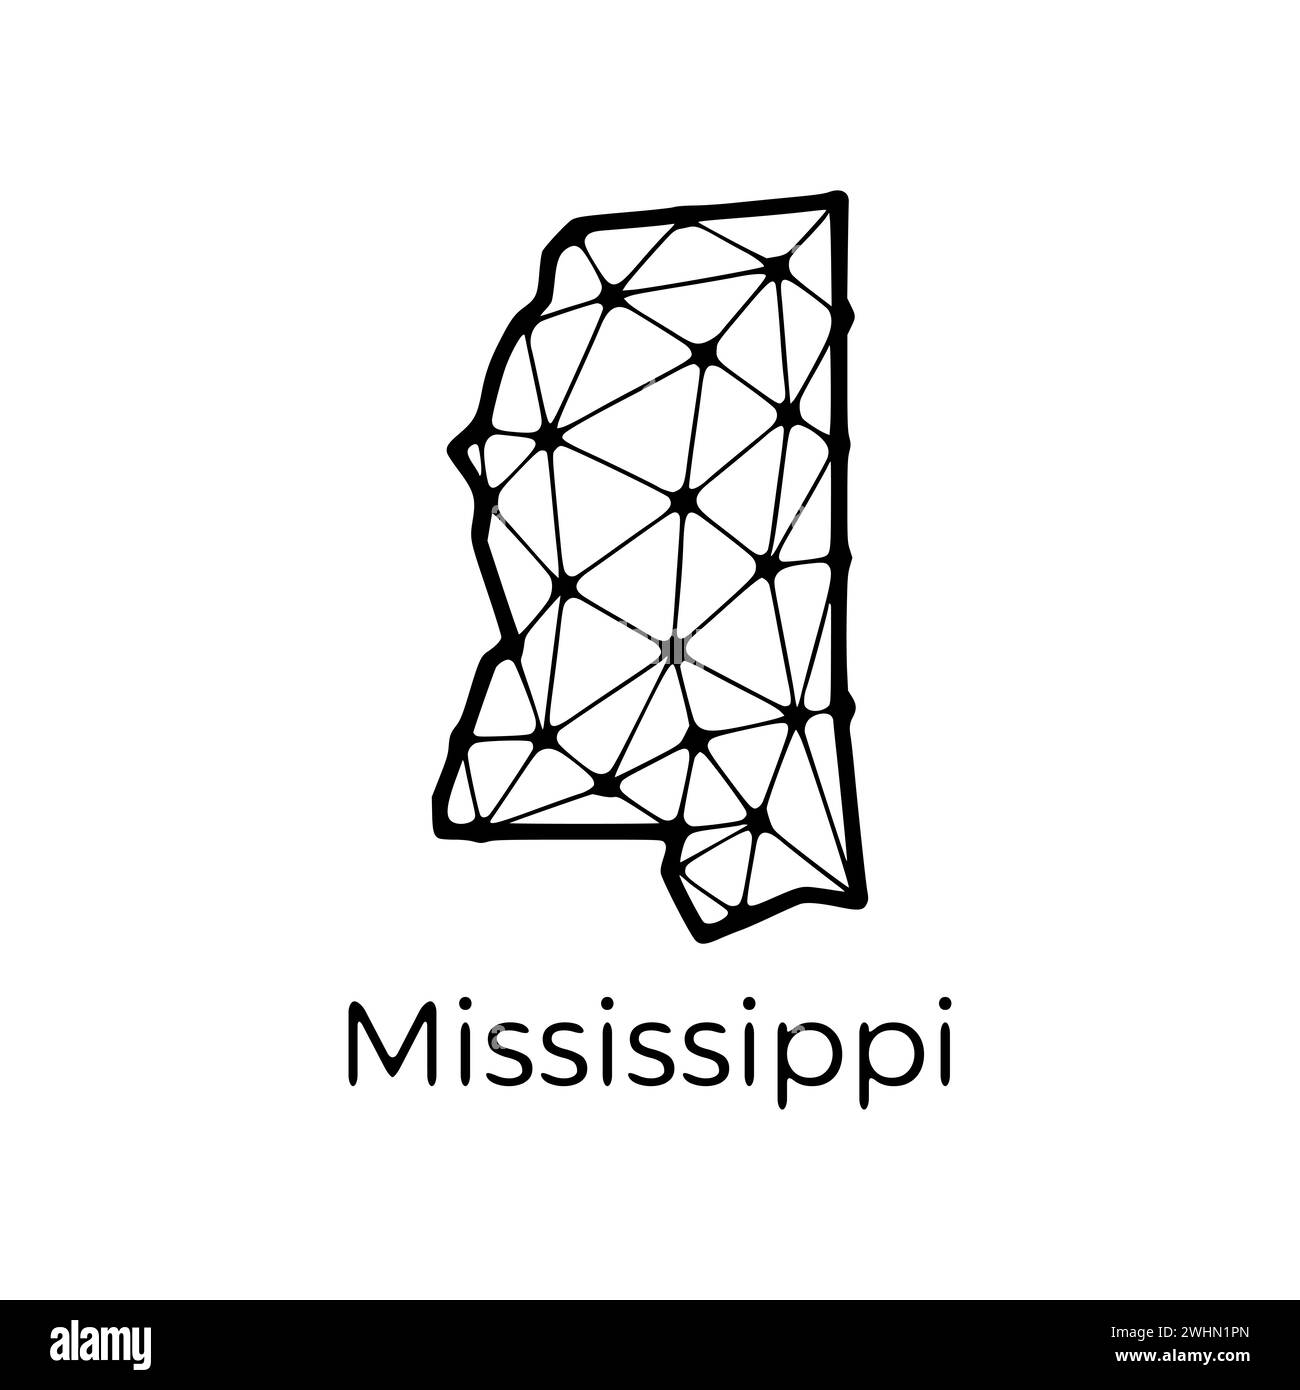 Mississippi state map polygonal illustration made of lines and dots, isolated on white background. US state low poly design Stock Photo